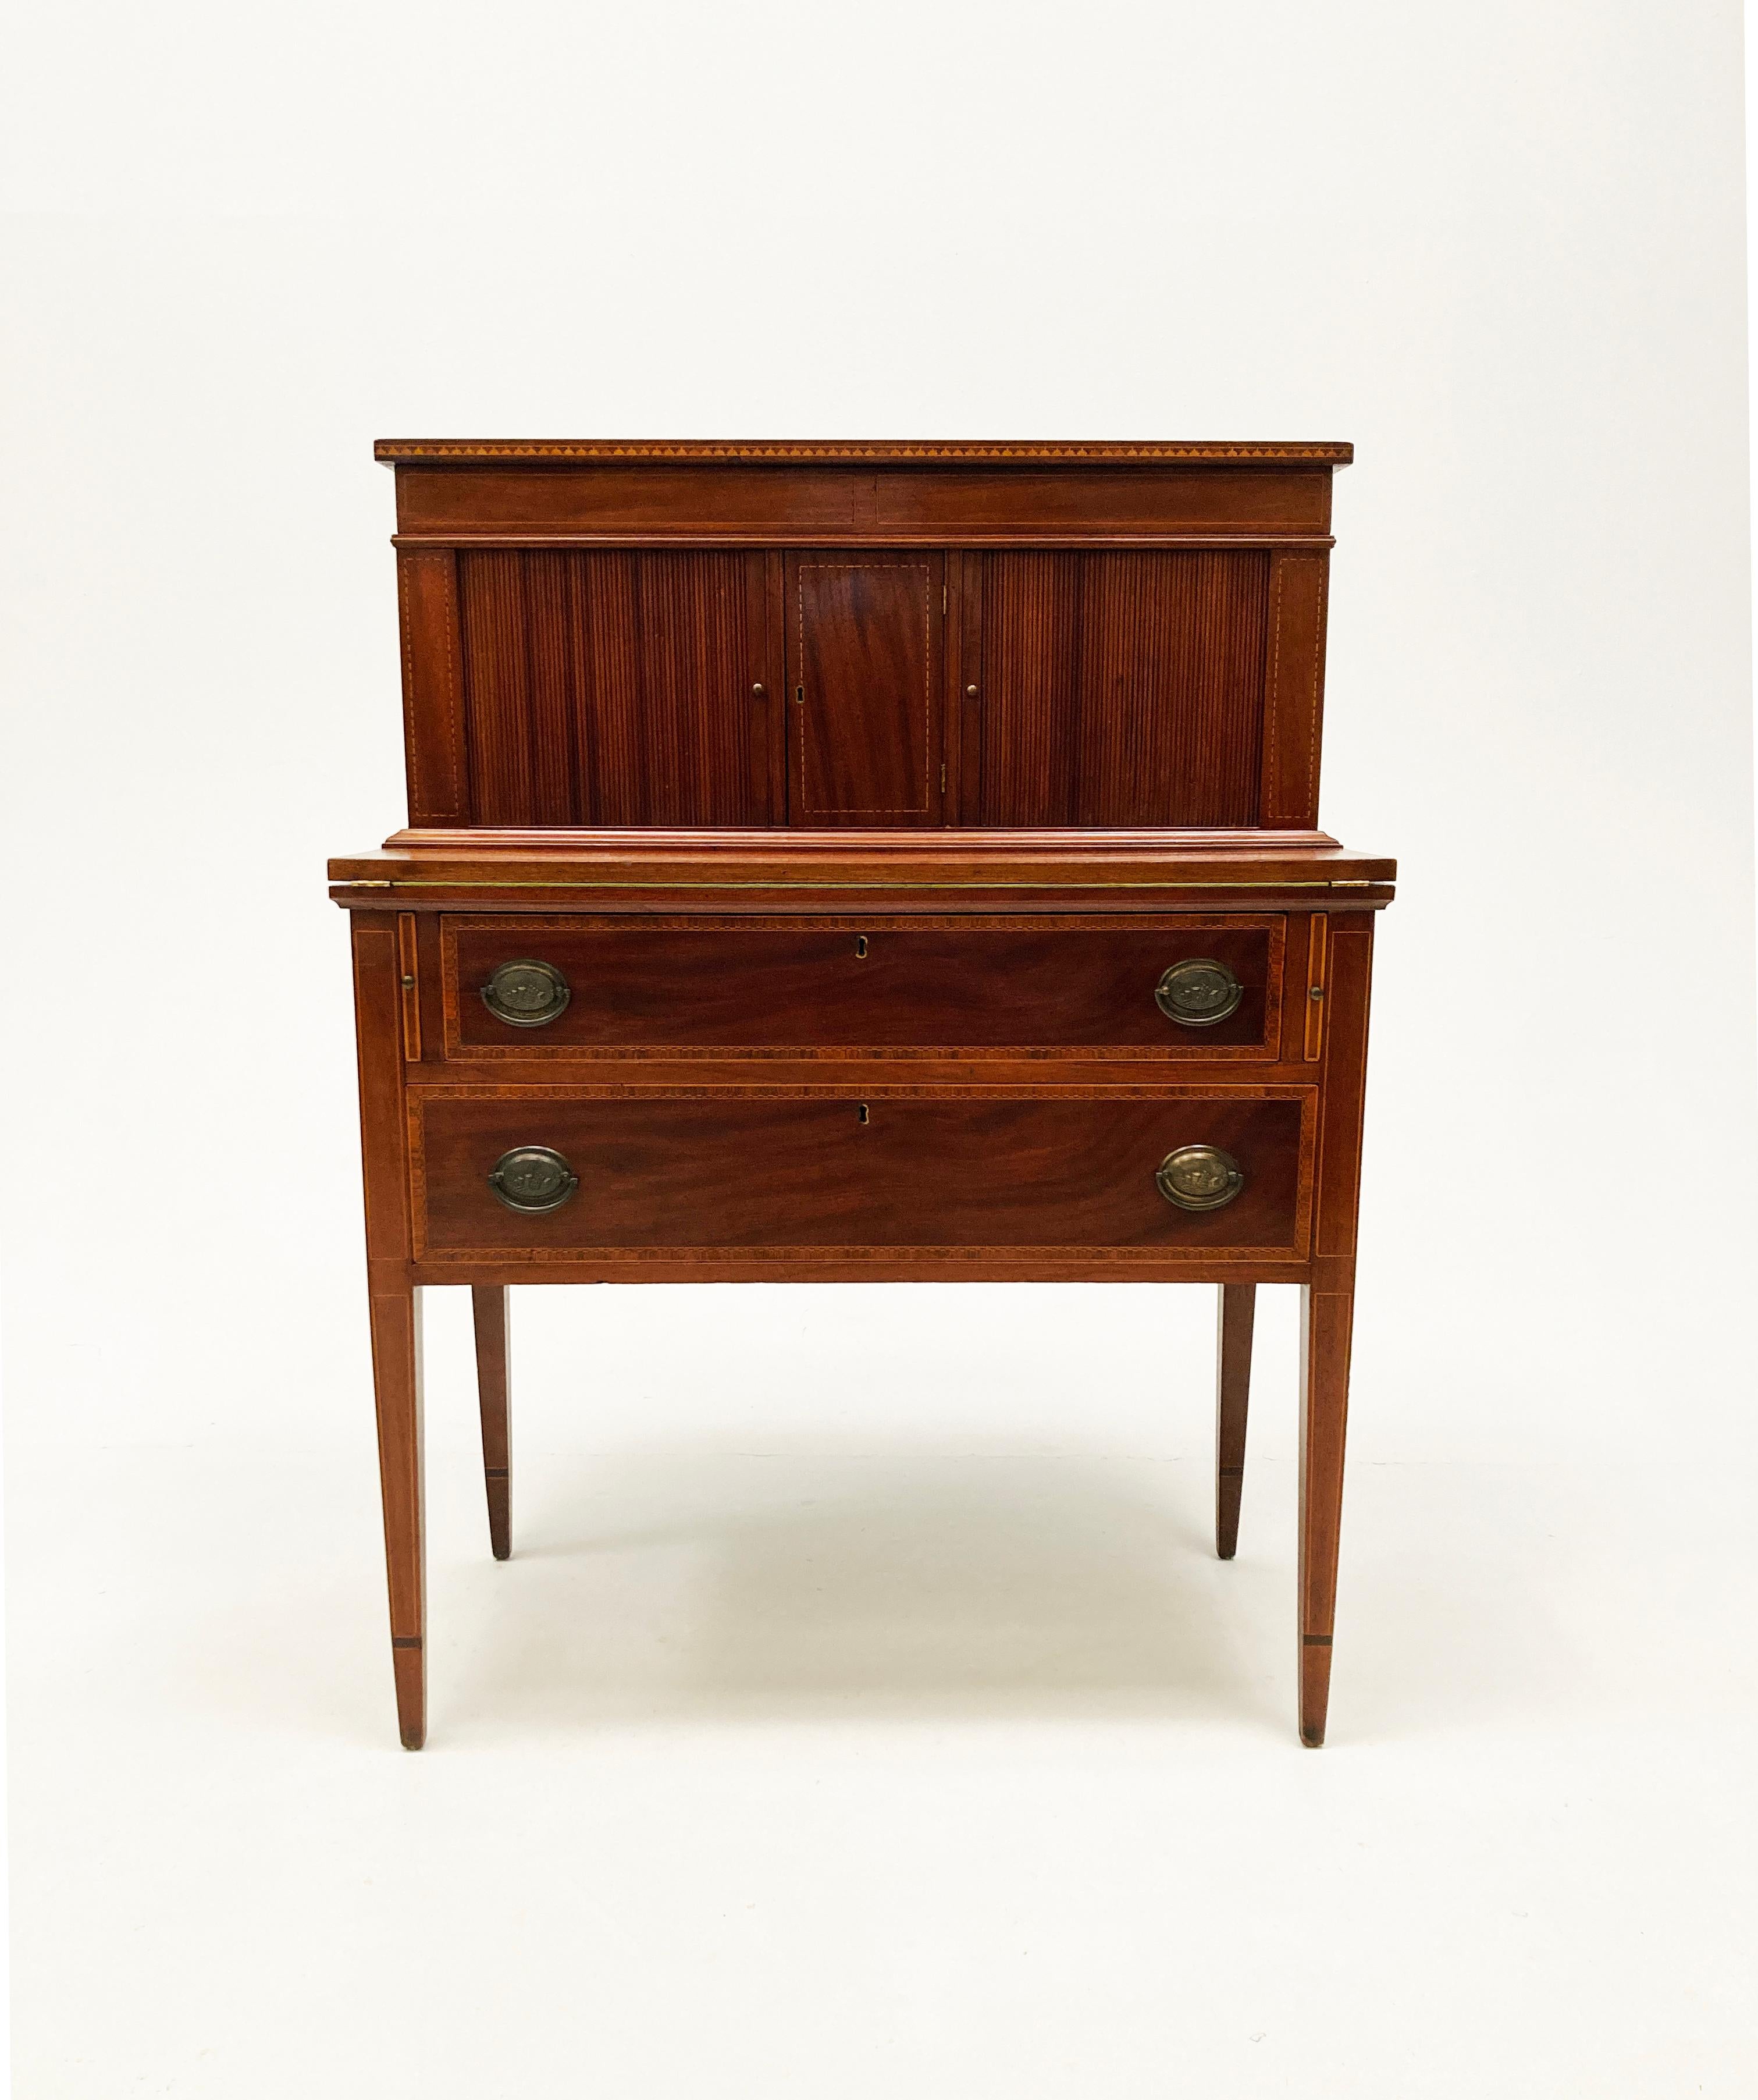 This stunning inlaid Mahogany Federal Hepplewhite Tambour Desk, most likely originated in the Massachusetts area between 1800-1805 time period. It is a stellar example of the craftsmanship of this era with its intricate inlay work as well as the